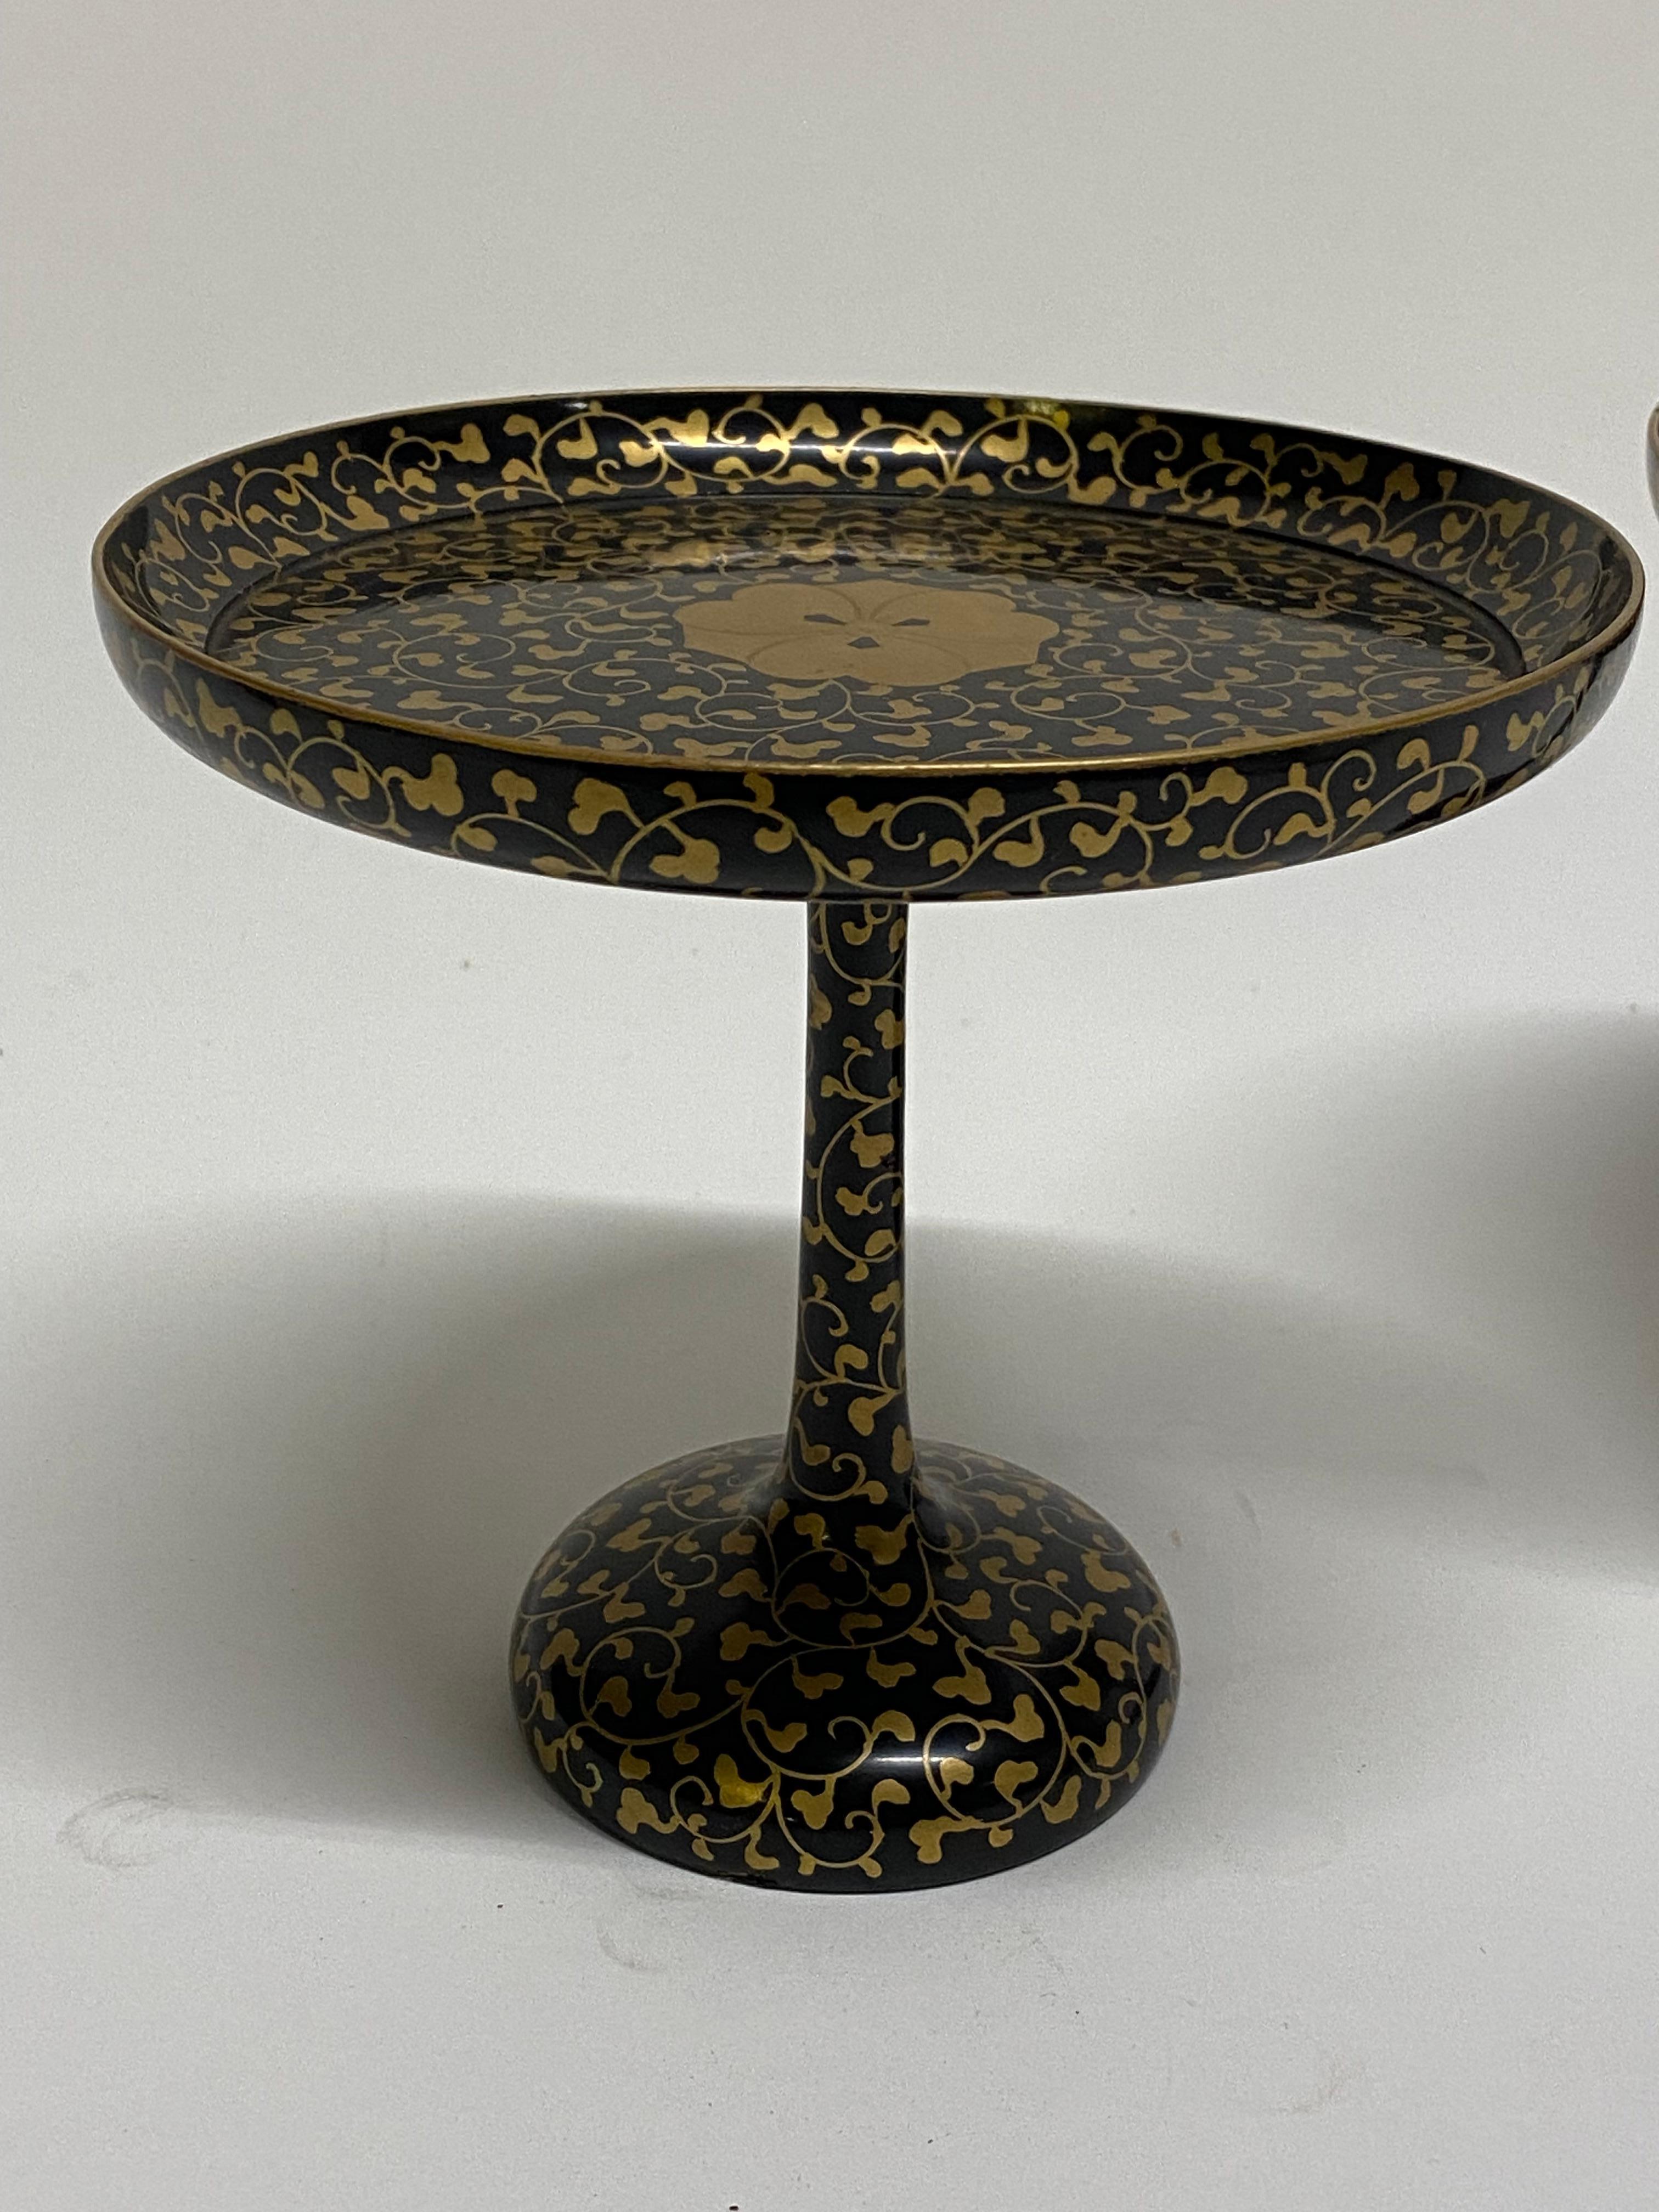 Lacquered Asian Black Lacquerware and Gold Tazzas, A Pair For Sale